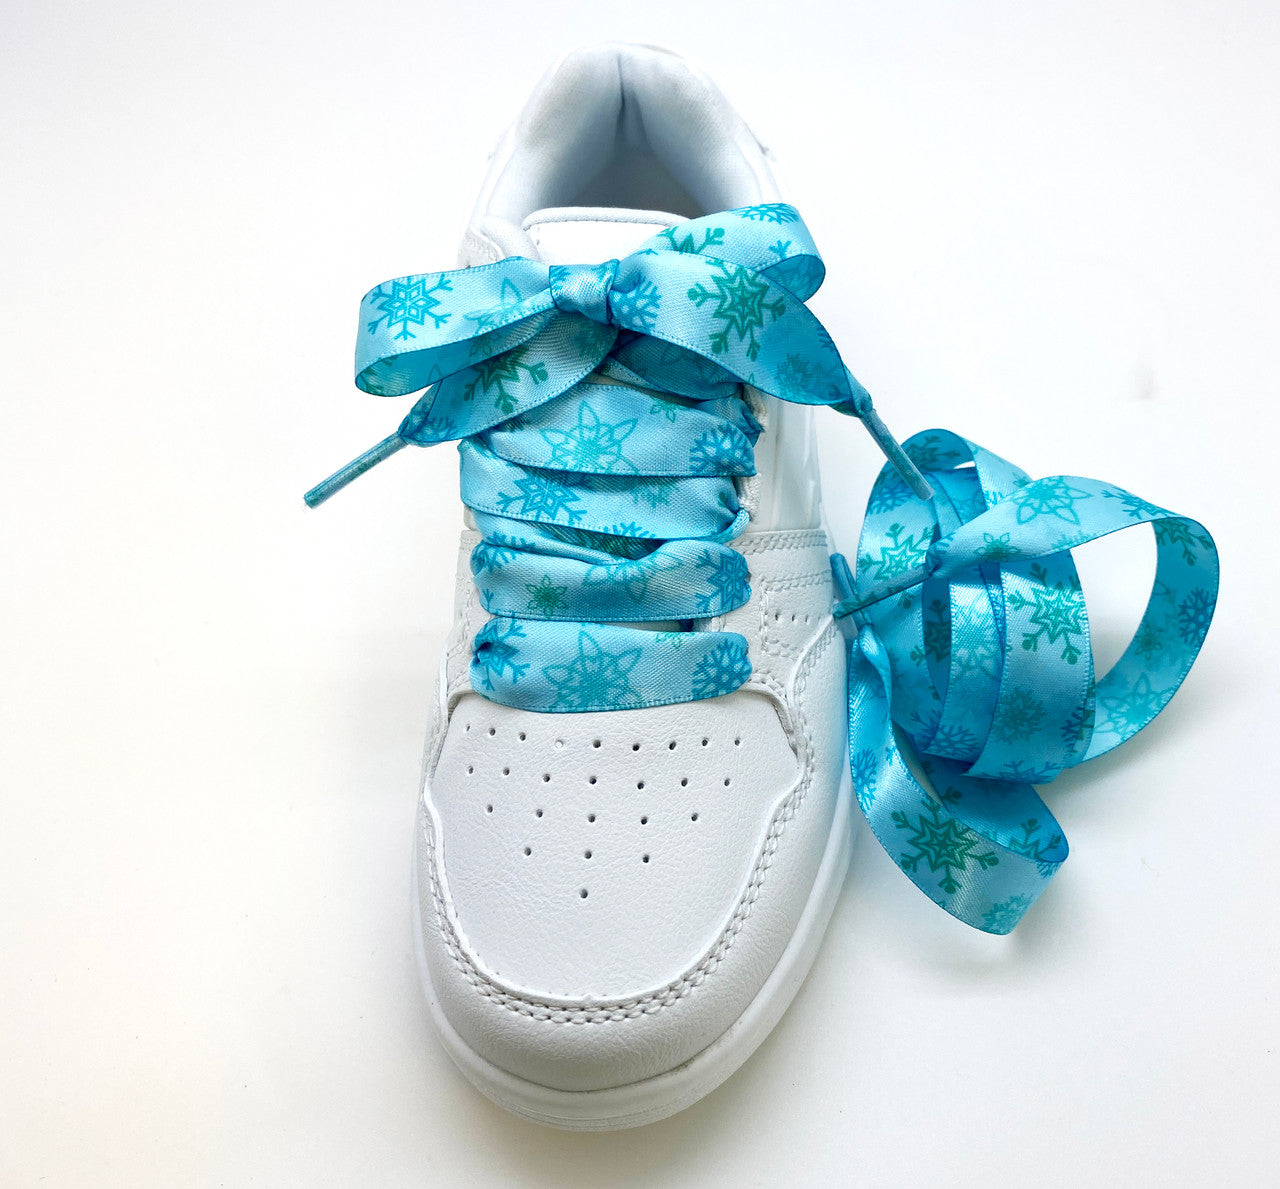 Lace your shoes with  our fun Frozen snowflake design!